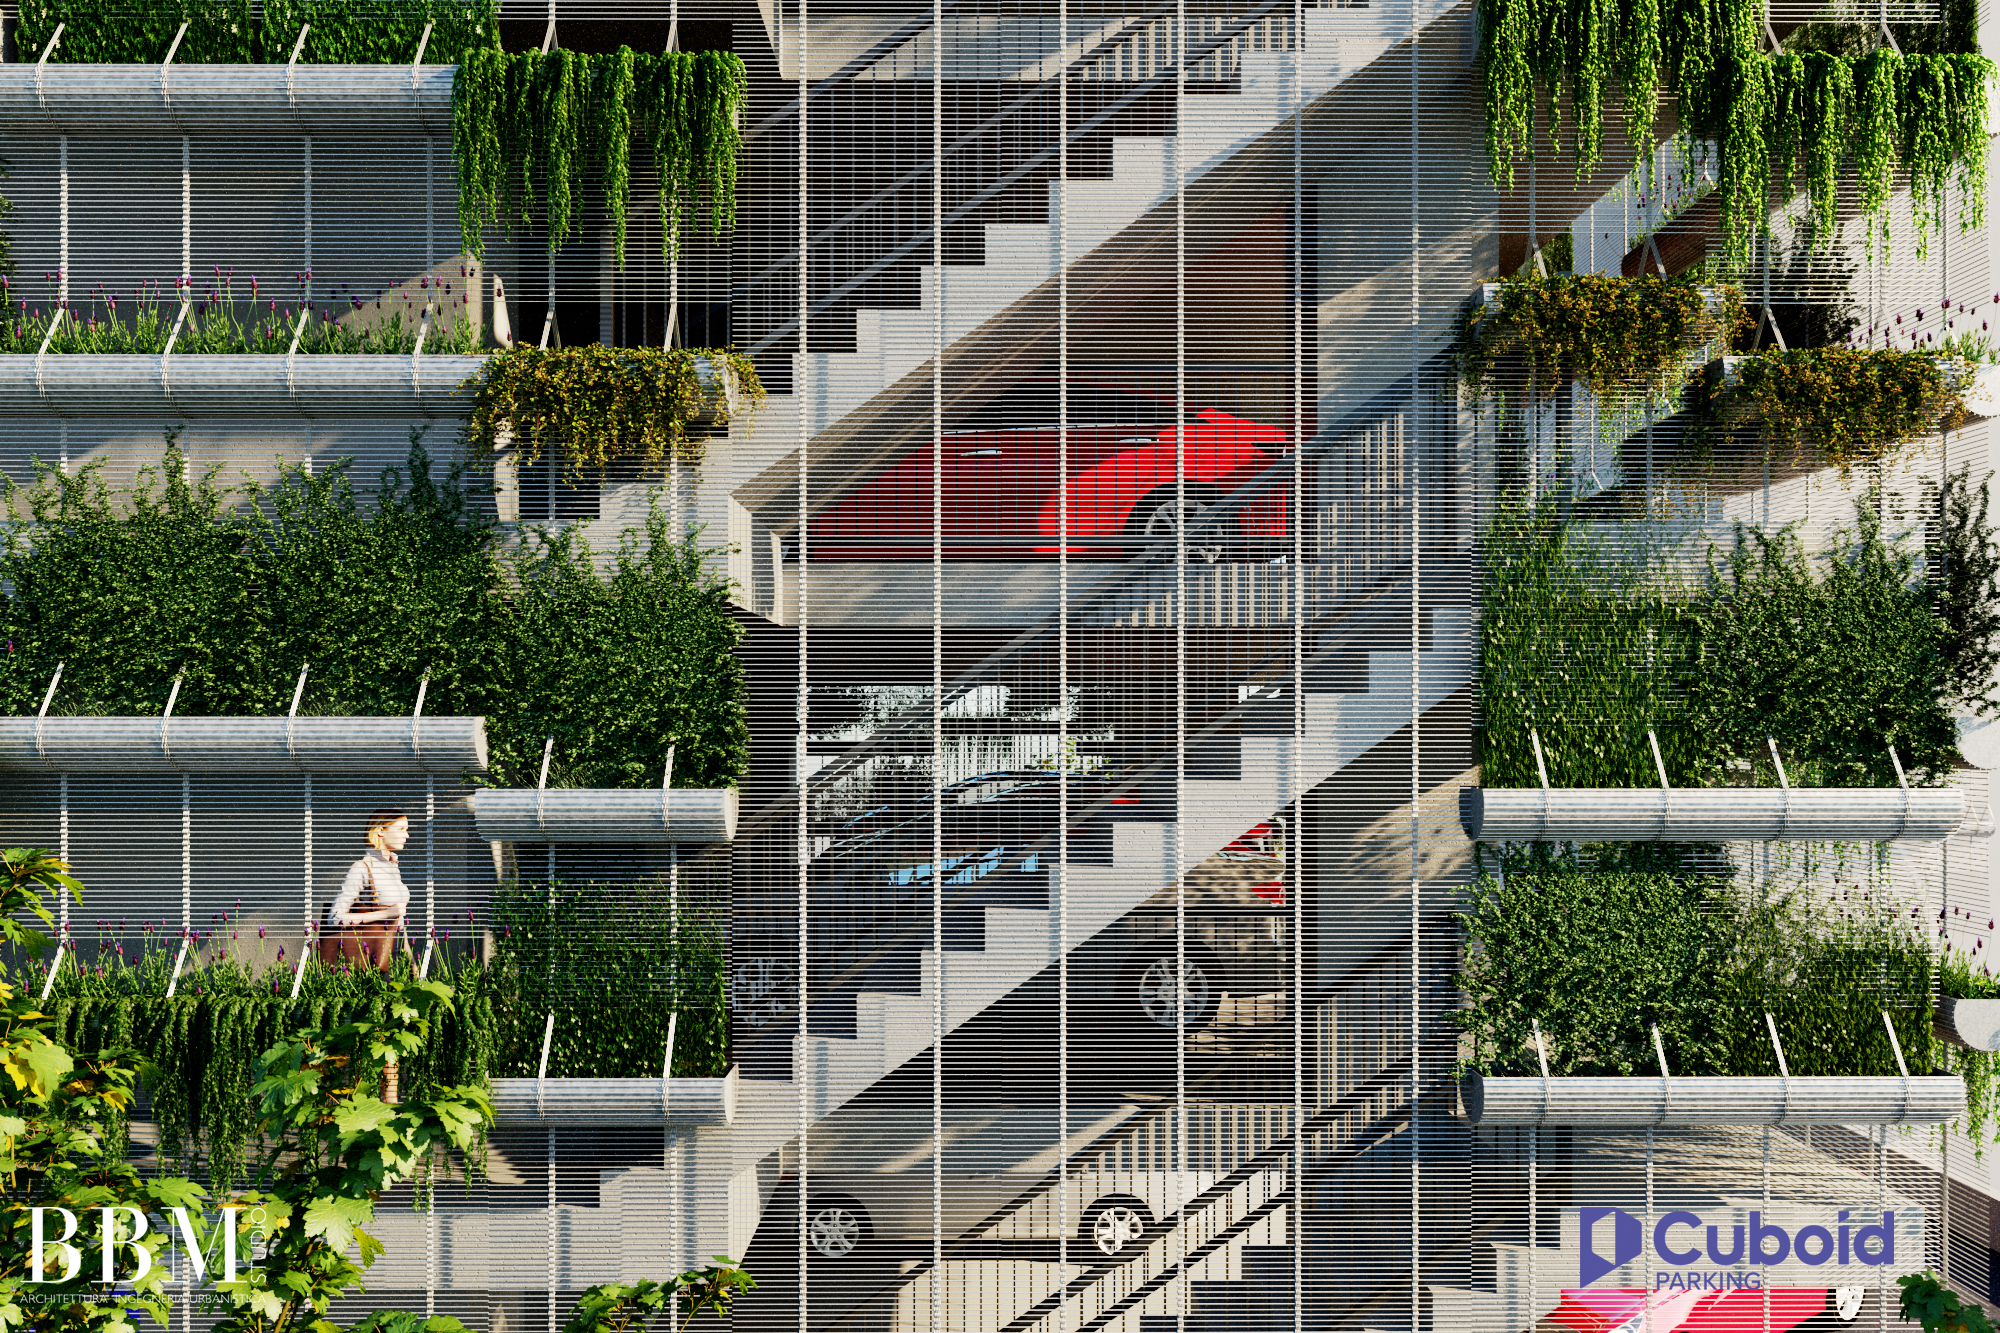 Cuboid Parking - Cuboid Facade and Stairway